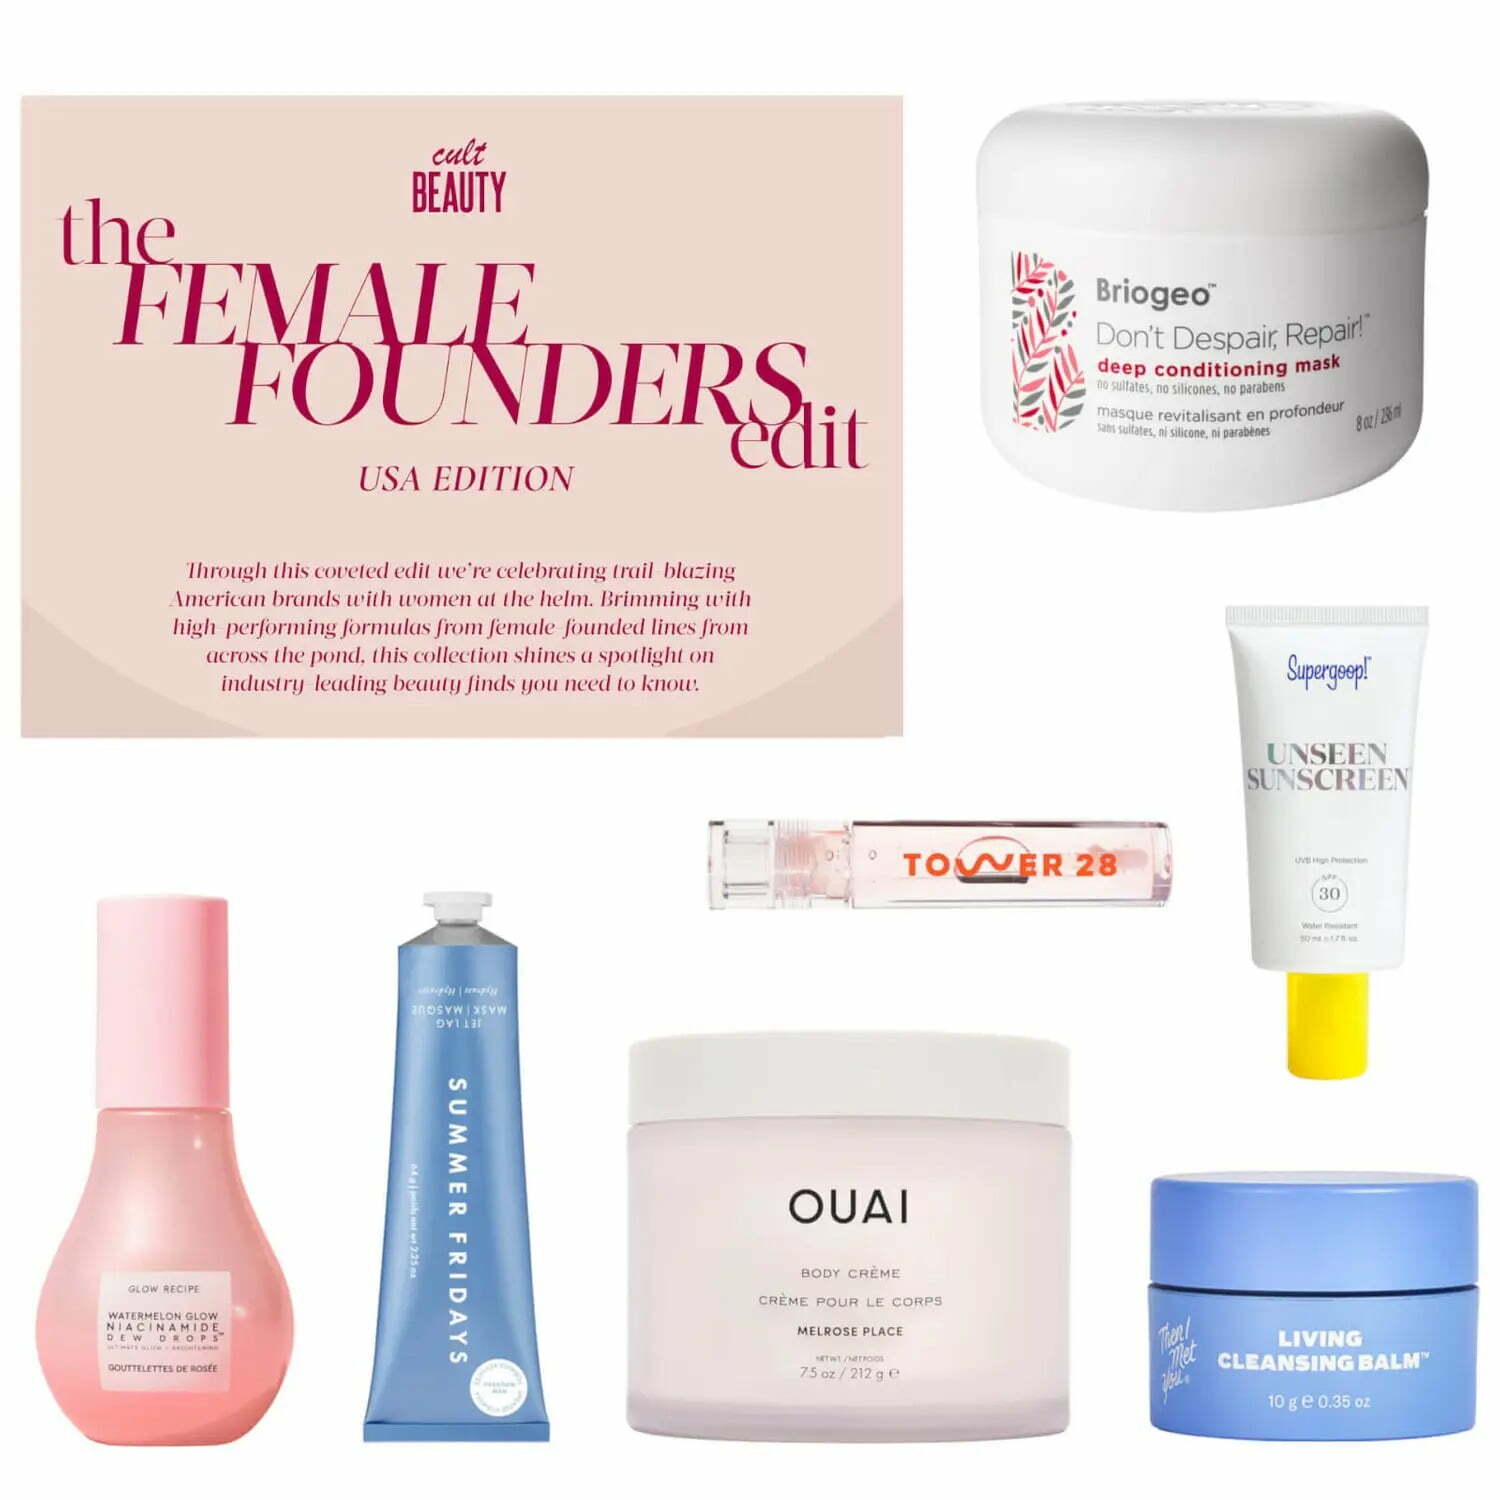 20% off the Cult Beauty The Female Founders Edit: USA Edition